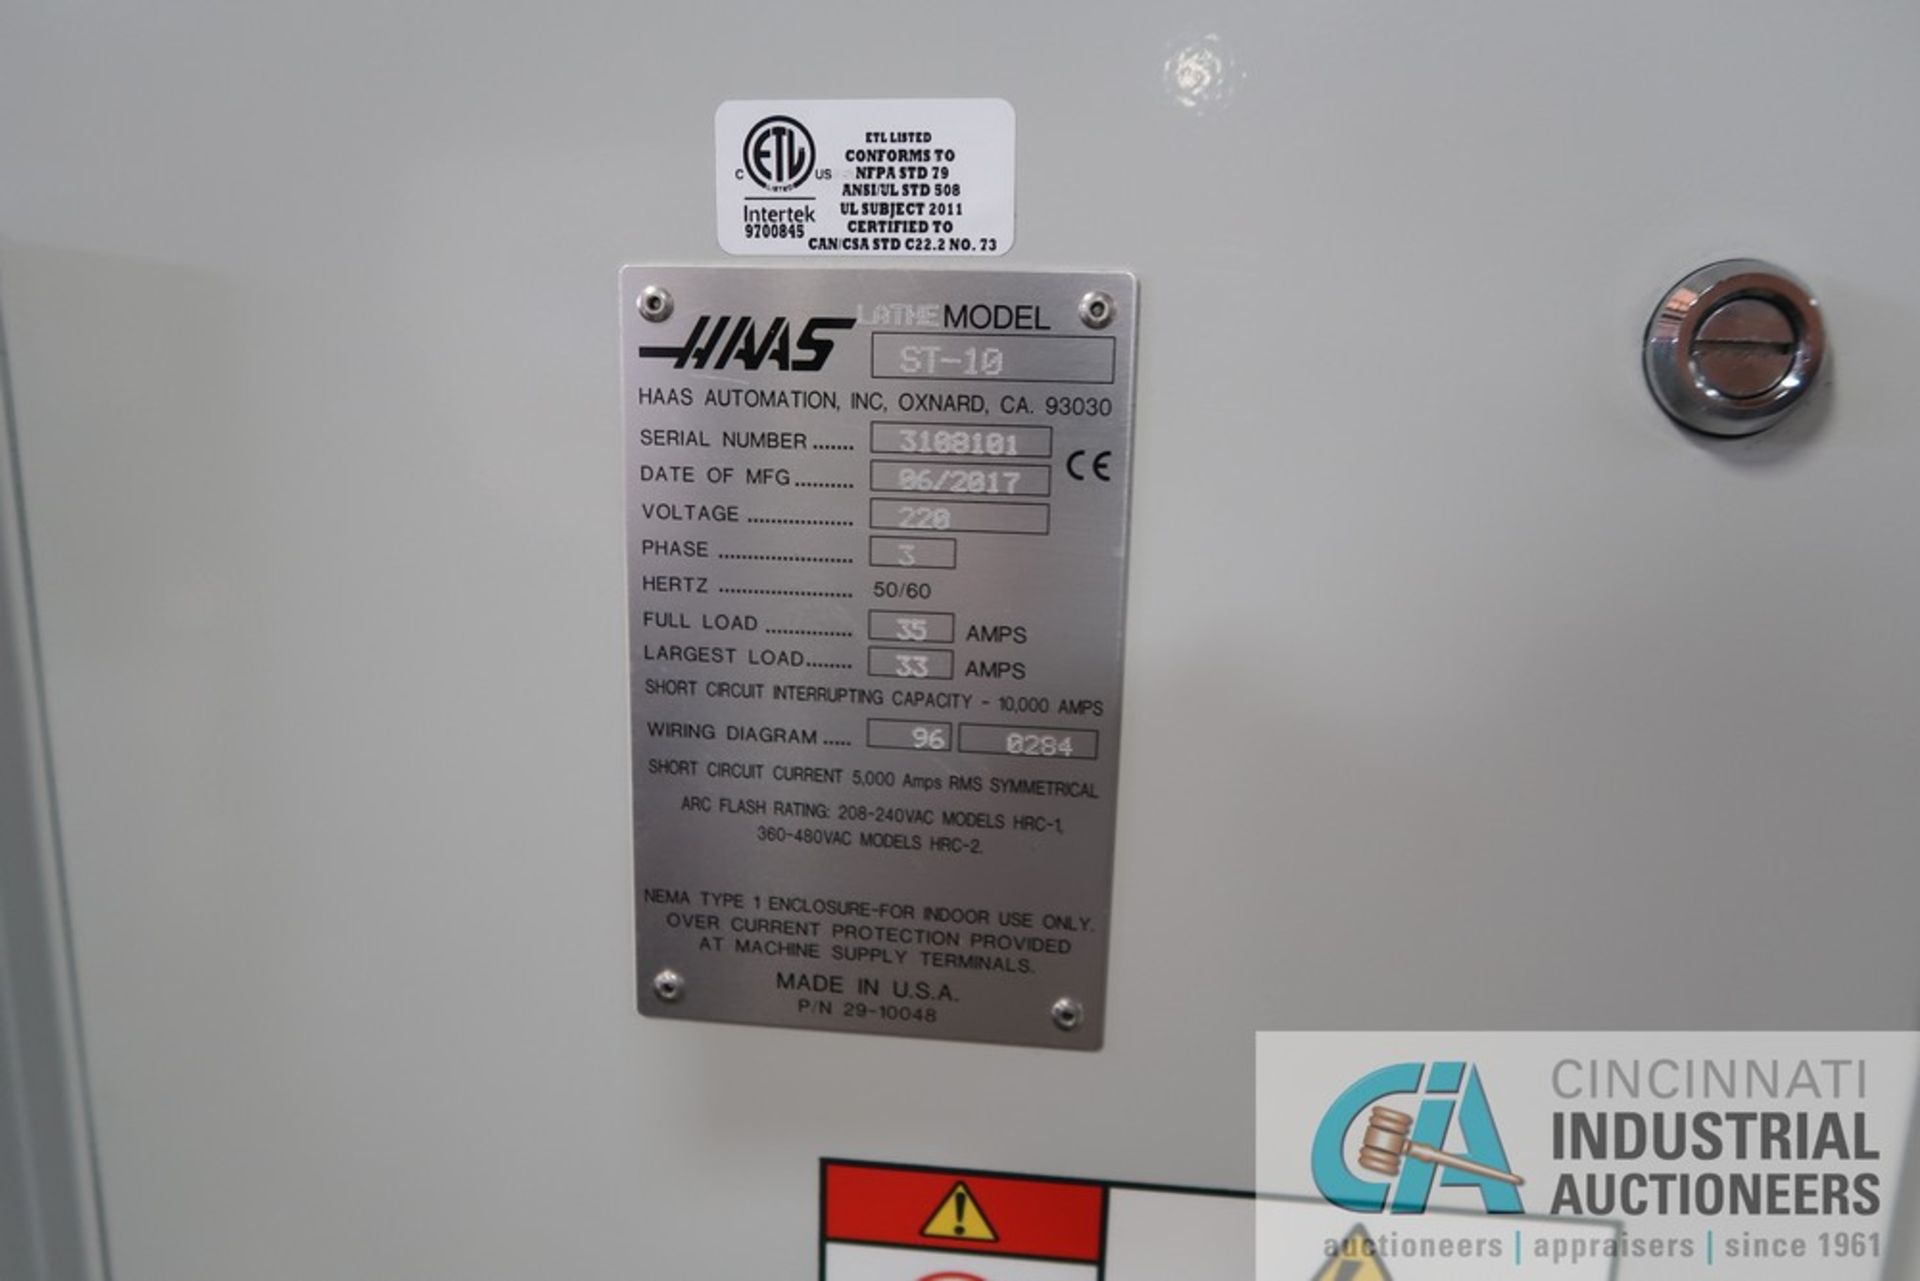 HAAS MODEL ST10 CNC TURNING CENTER; S/N 3108101, COLLET CHUCK, 12-POSITION TURRET, TOOL PRESETTER, - Image 9 of 10